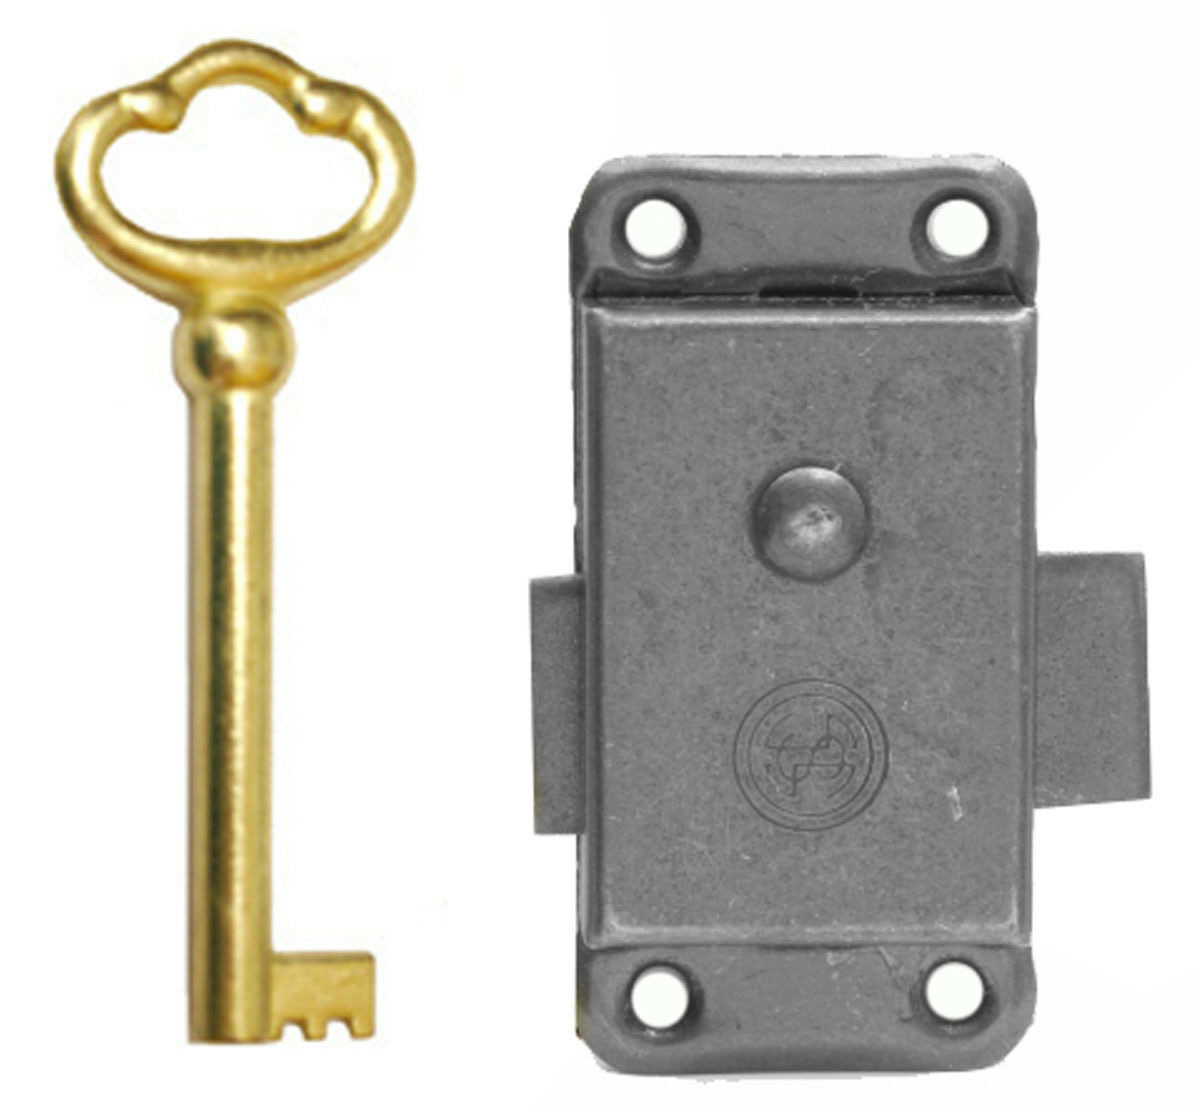 2pc. Lock and Key Set - Ronell Clock Co.